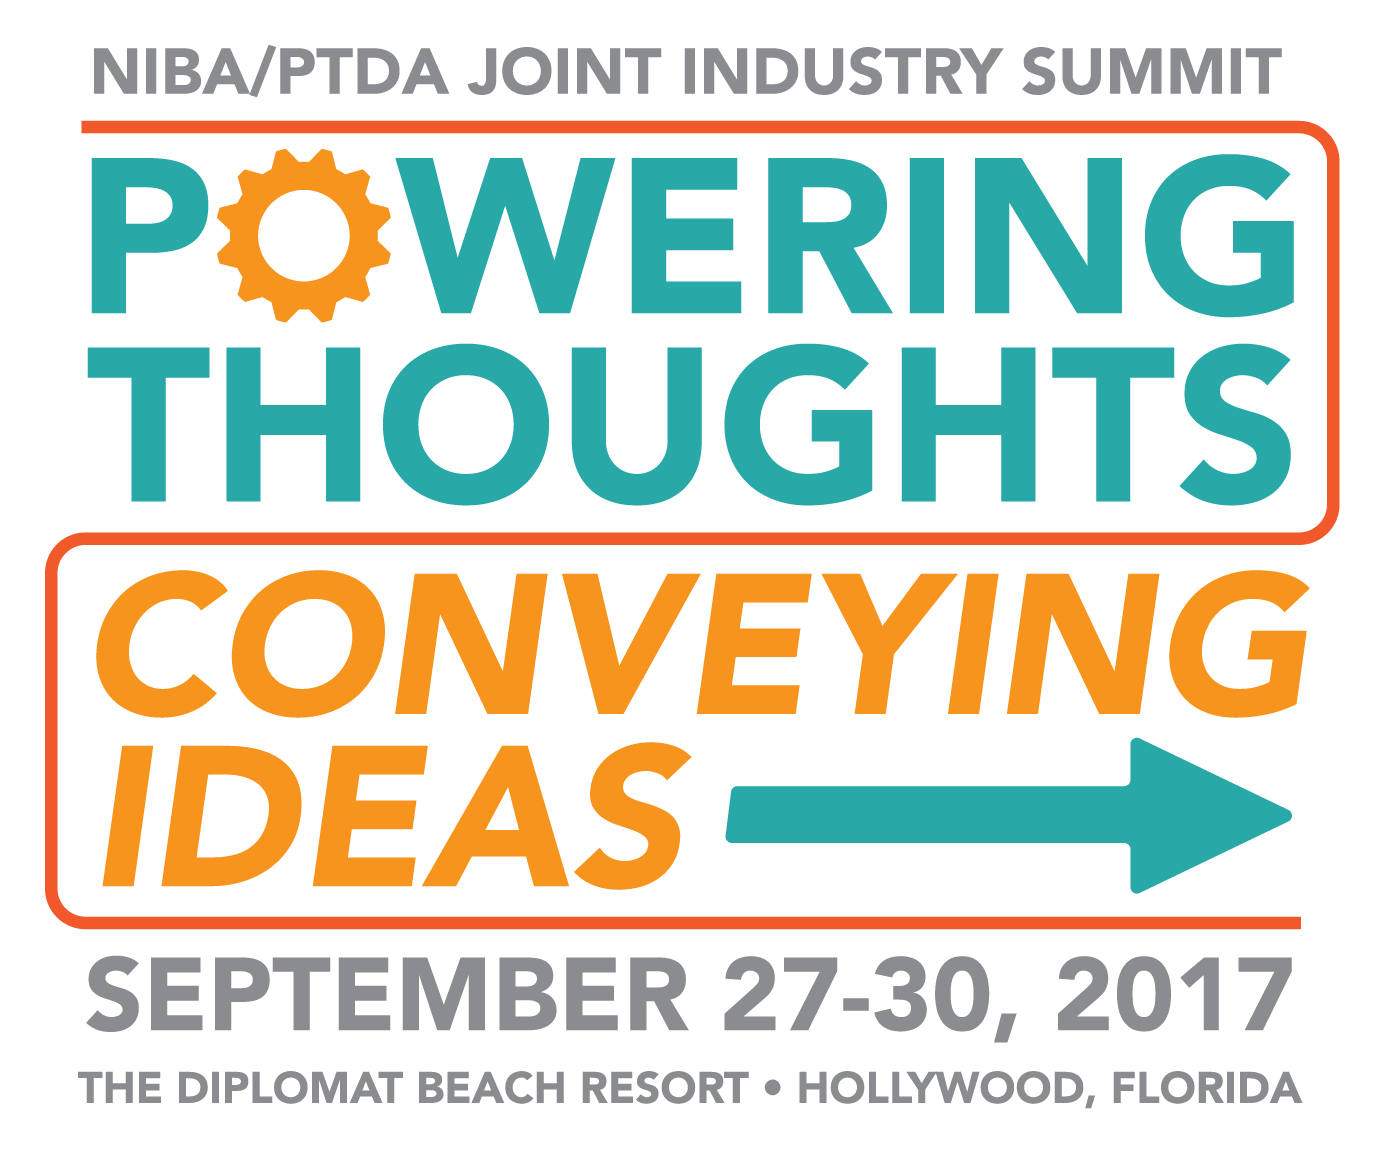 KHK USA to attend the NIBA/PTDA Industry Summit